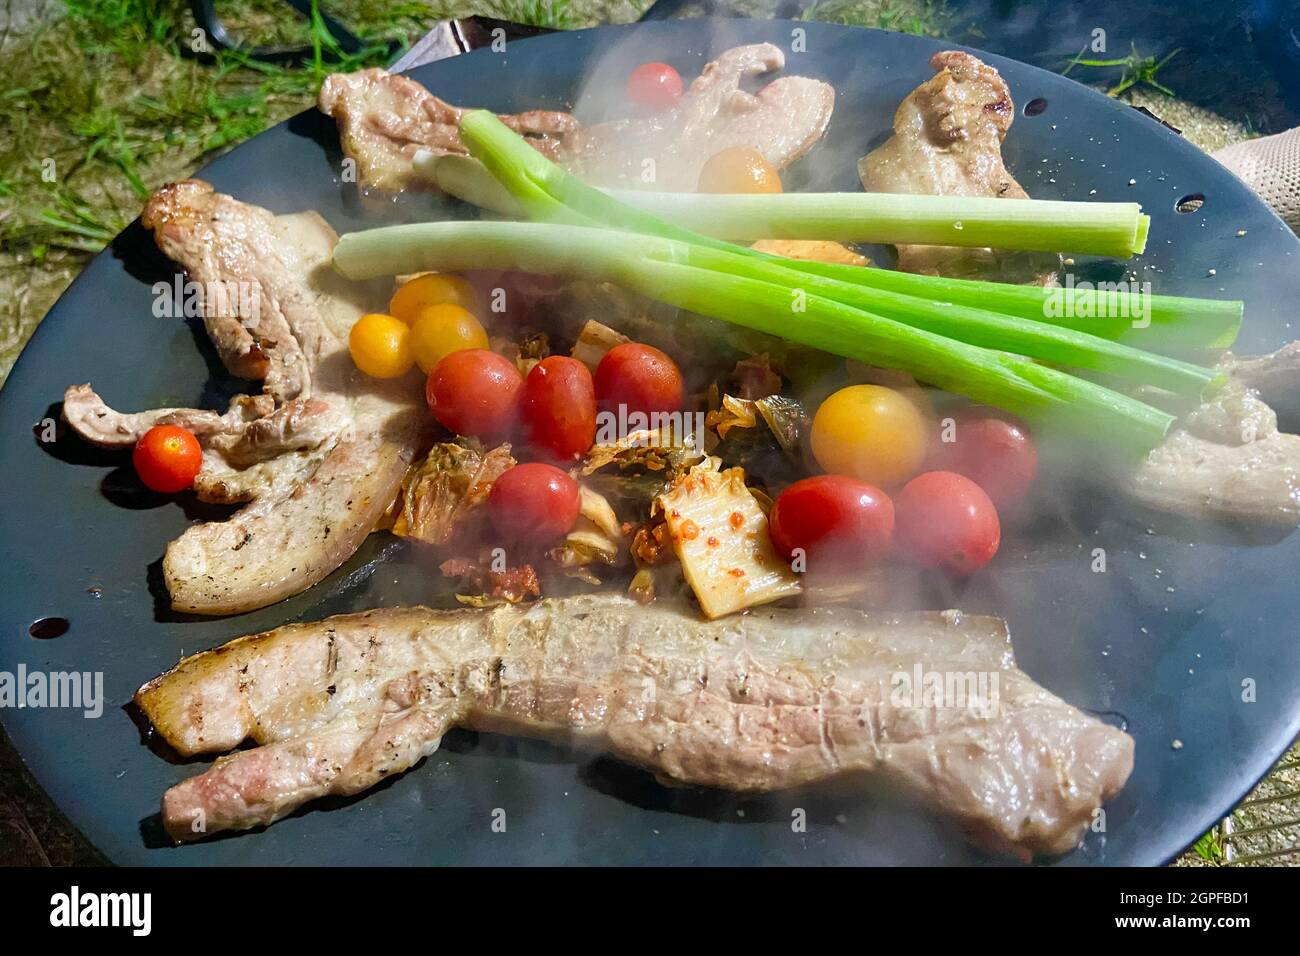 cooking pork belly and vegetables at the campsite Stock Photo